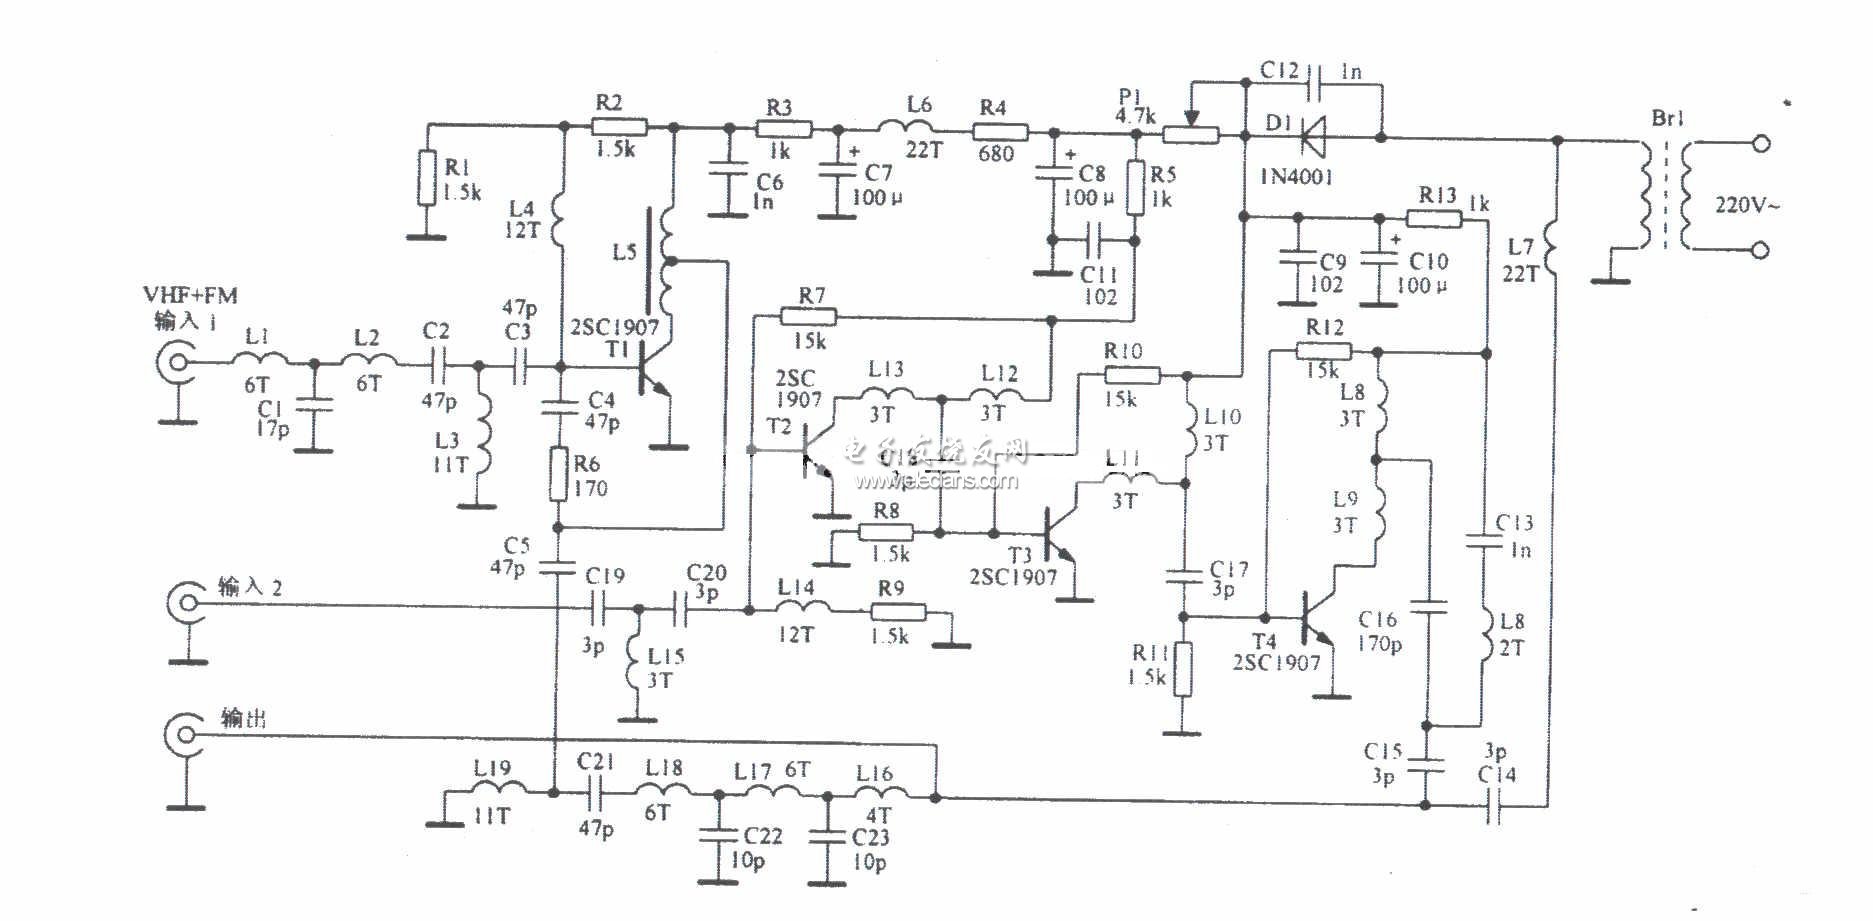 Amplified circuit diagram of improved Torres full-channel antenna